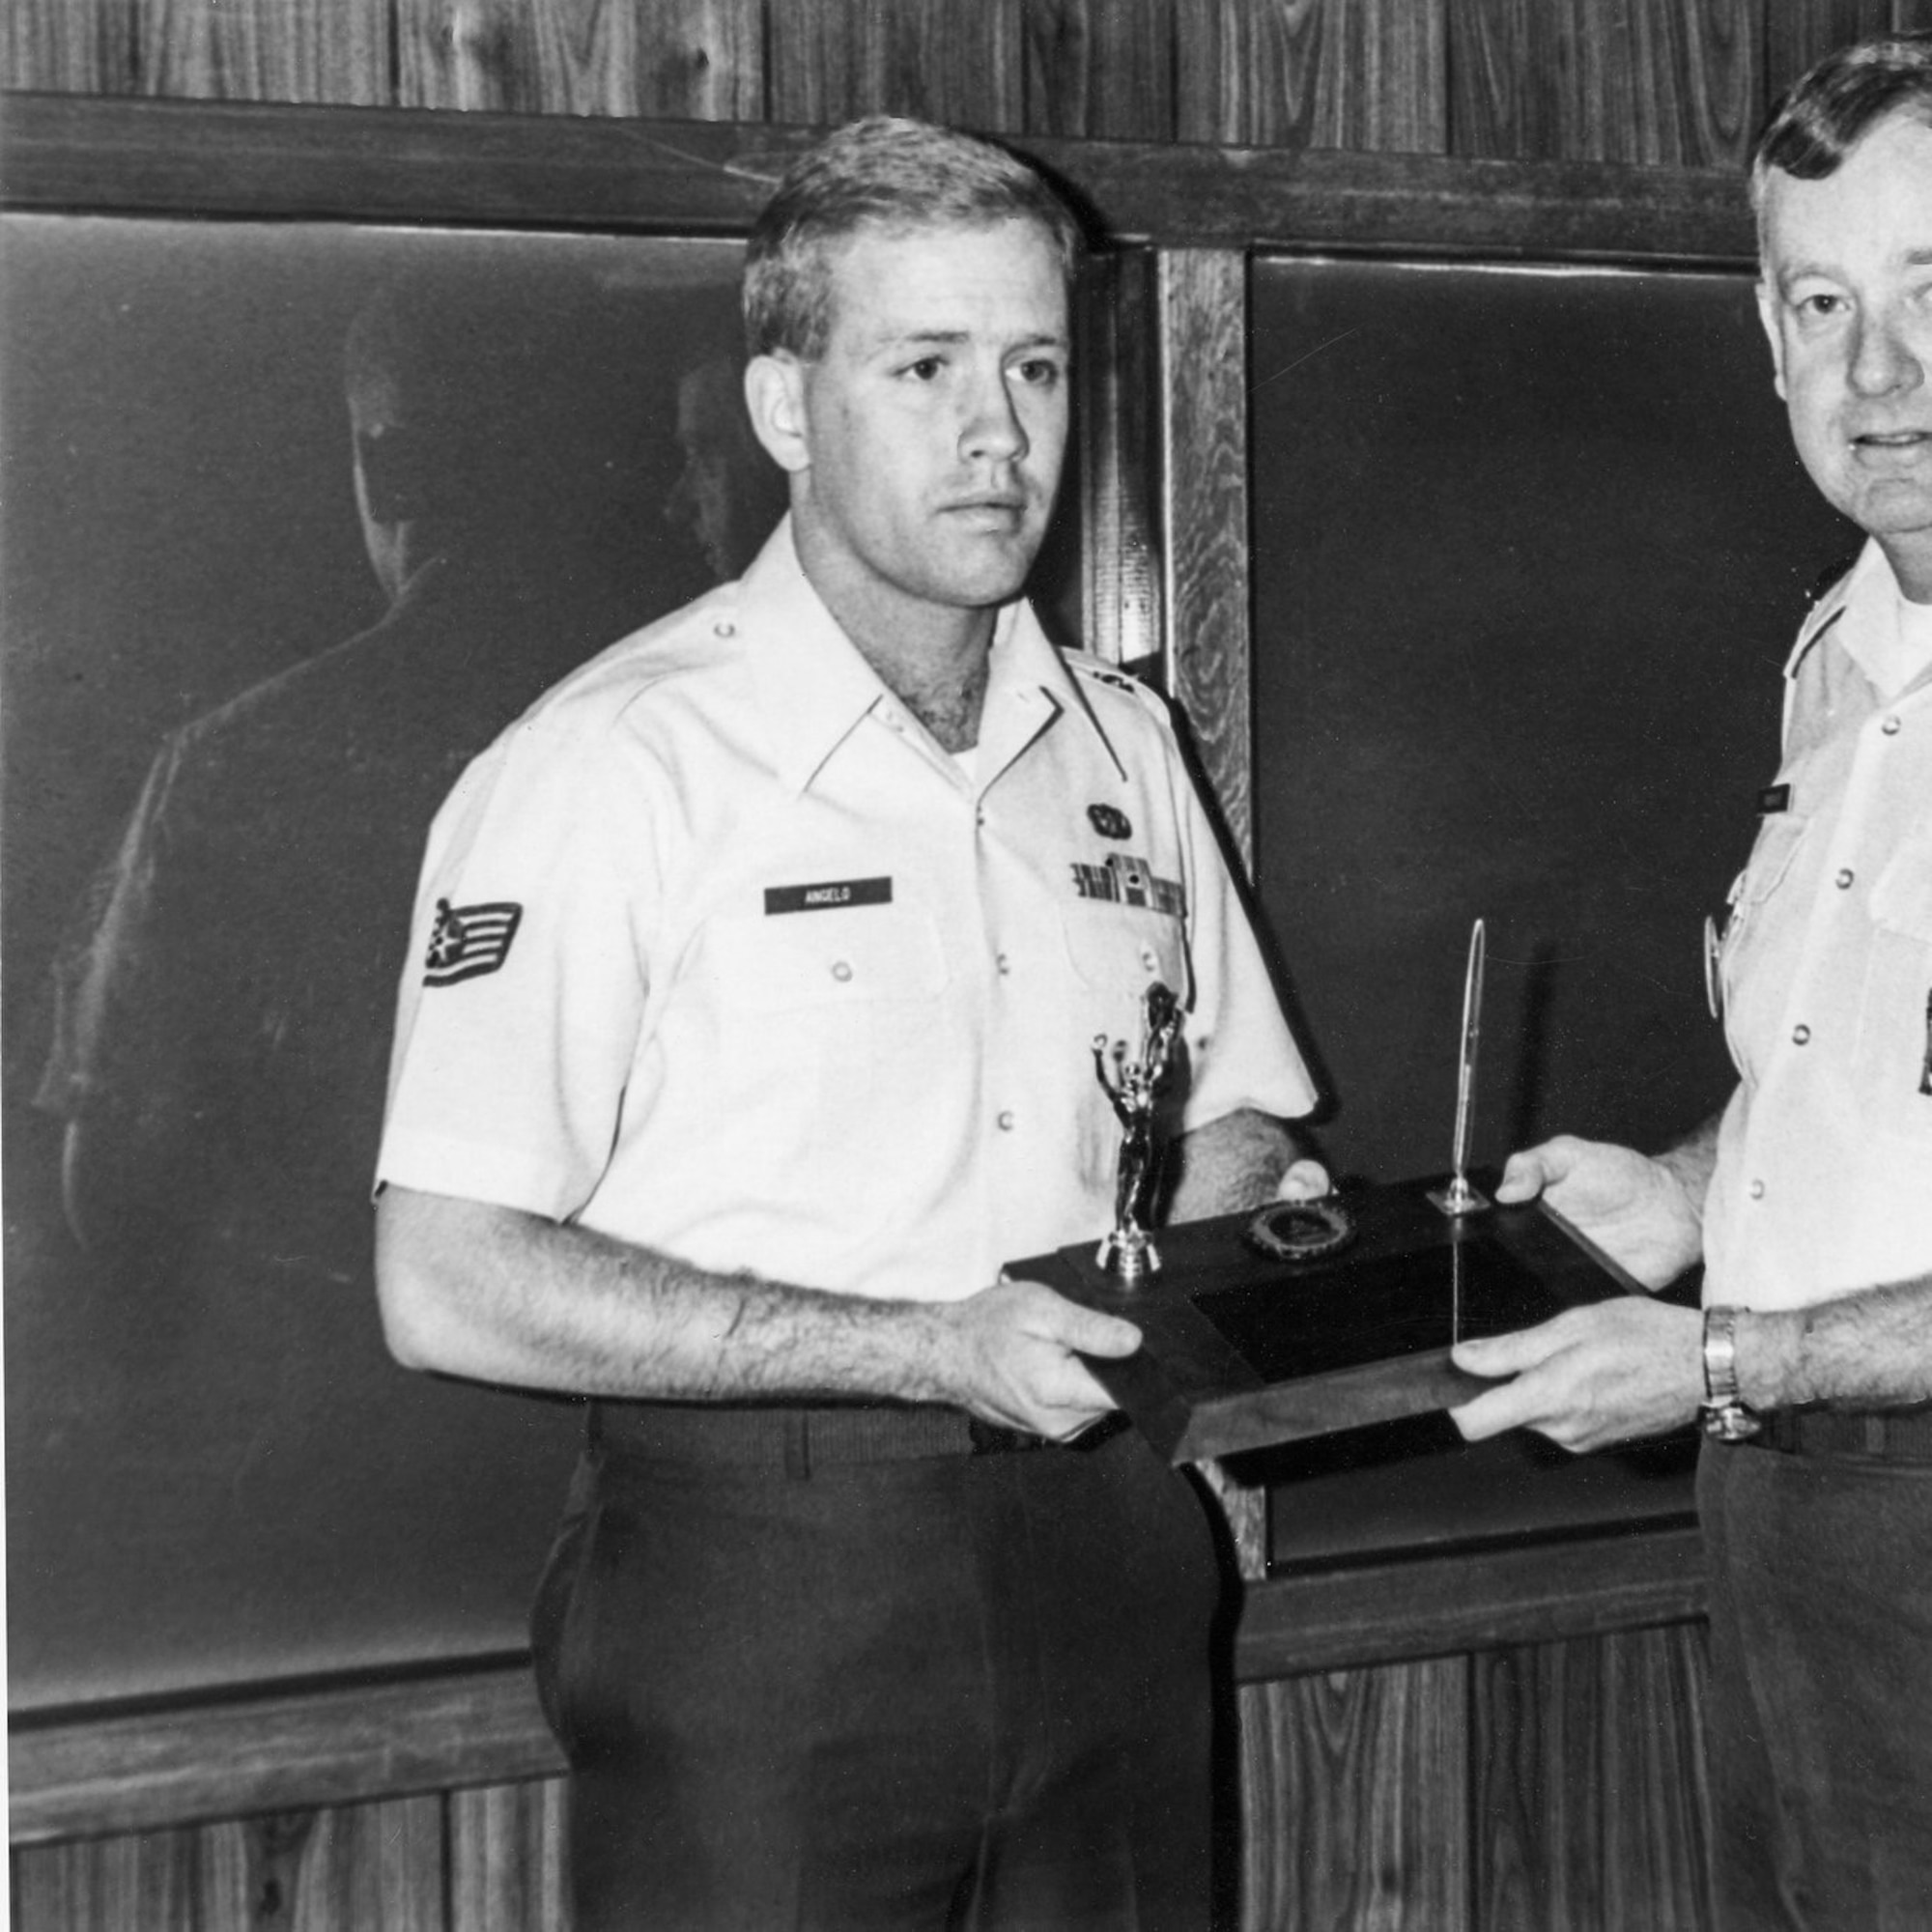 Then Staff Sgt. Jack Angelo, an Agent Trainee at Office of Special Investigations Detachment 2006, Malmstrom Air Force Base, Mont., receives the John Levitow Honor Graduate Award from the Leadership School's 341st Missile Wing commander in July 1986. The event was publicized in the base newspaper. (Courtesy photo)